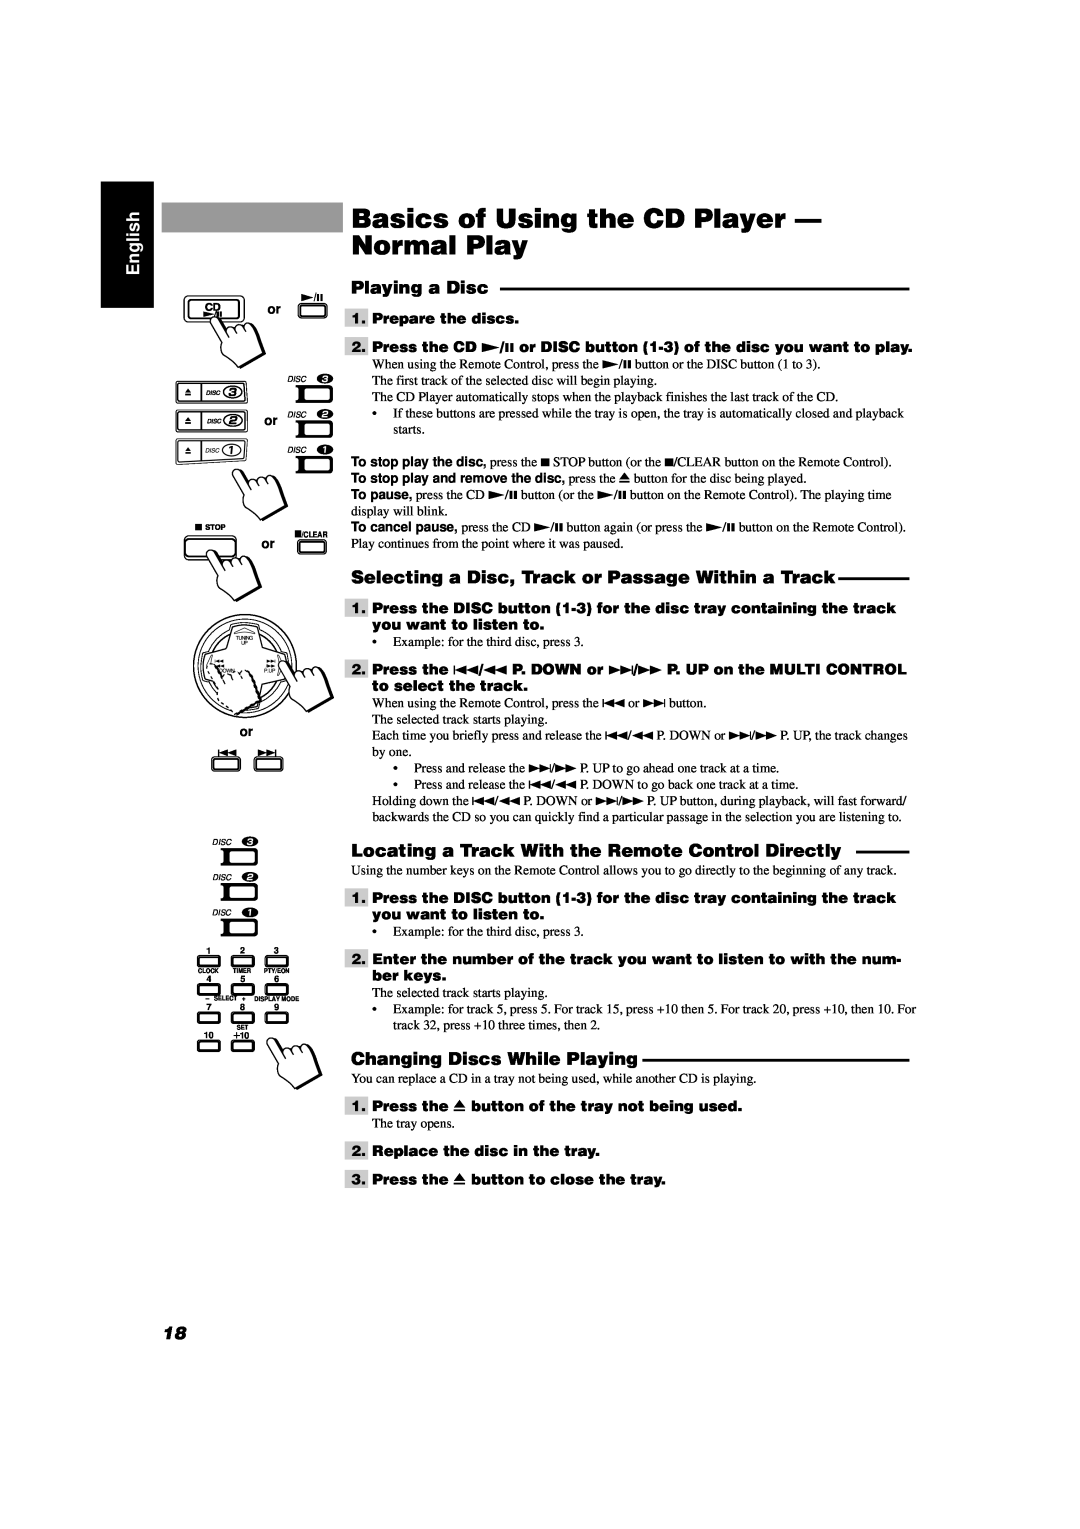 JVC CA-D352TR, CA-D302T Basics of Using the CD Player - Normal Play, Playing a Disc, Changing Discs While Playing, English 